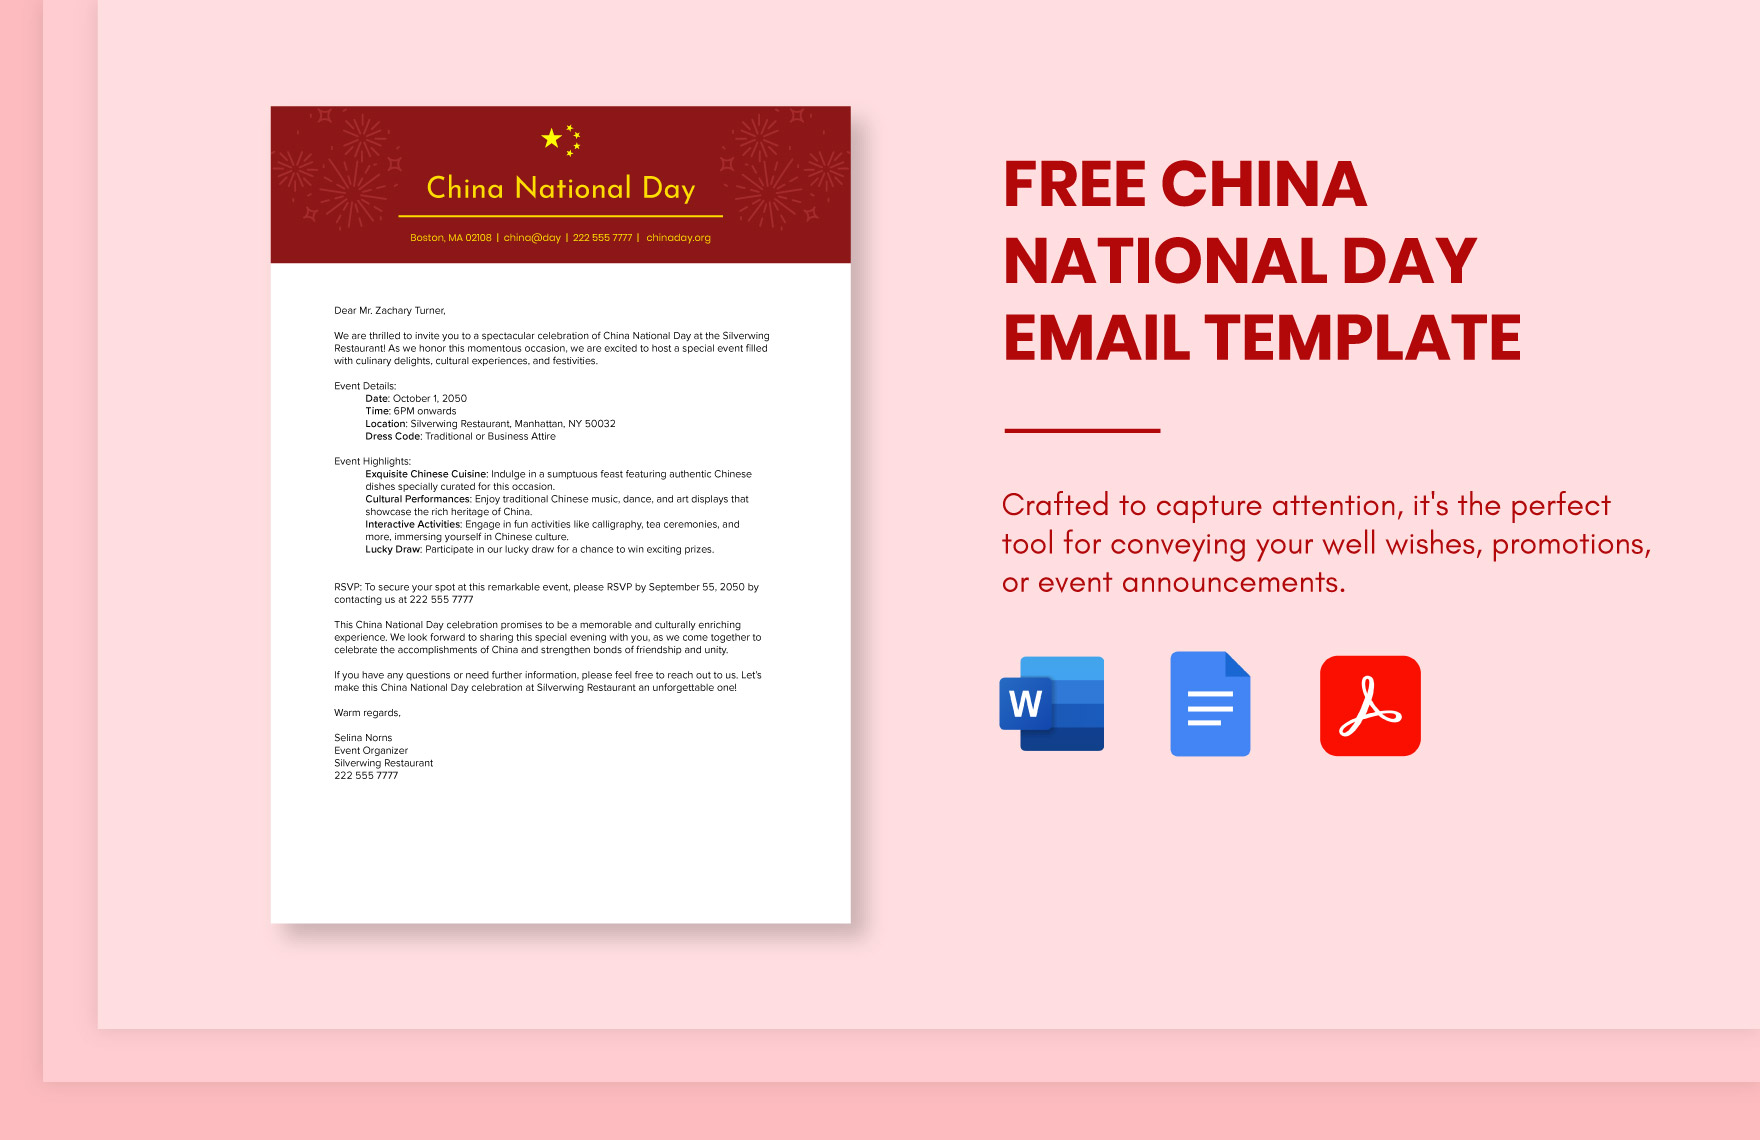 China National Day Email Template